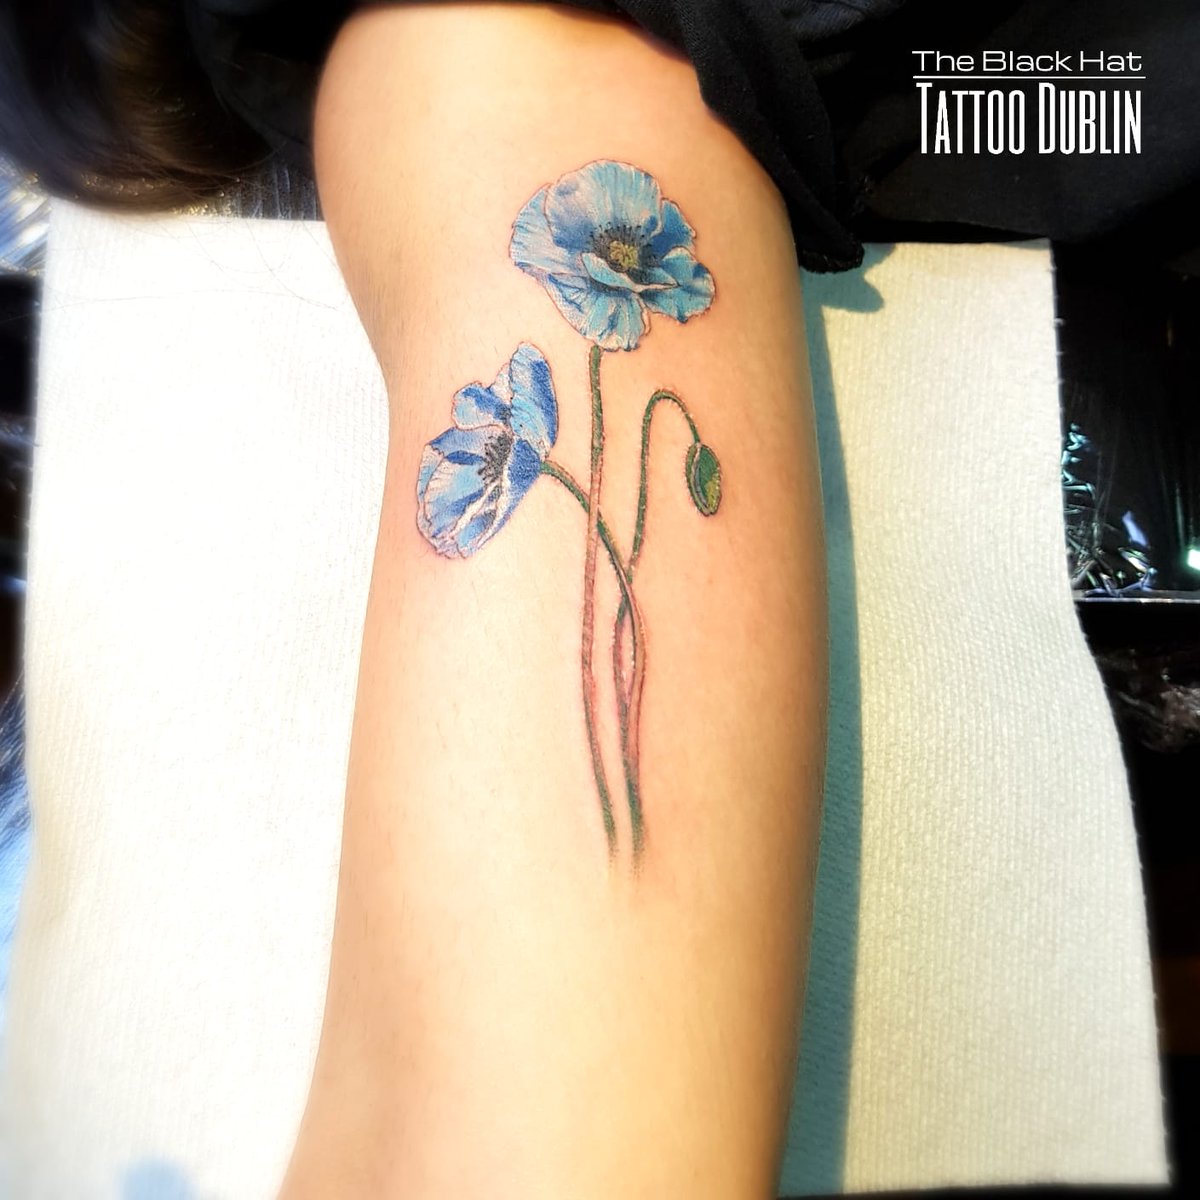 Blackhattattoodublin Most People Ink A Red Poppy Flower But Some Like More Blue Flowers And You Sergy Black Hat Poppyflower Poppyflowertattoo Dublintattoo Flowertattoo Blackhatdublin Tattoodublin T Co 2odptdzxrl